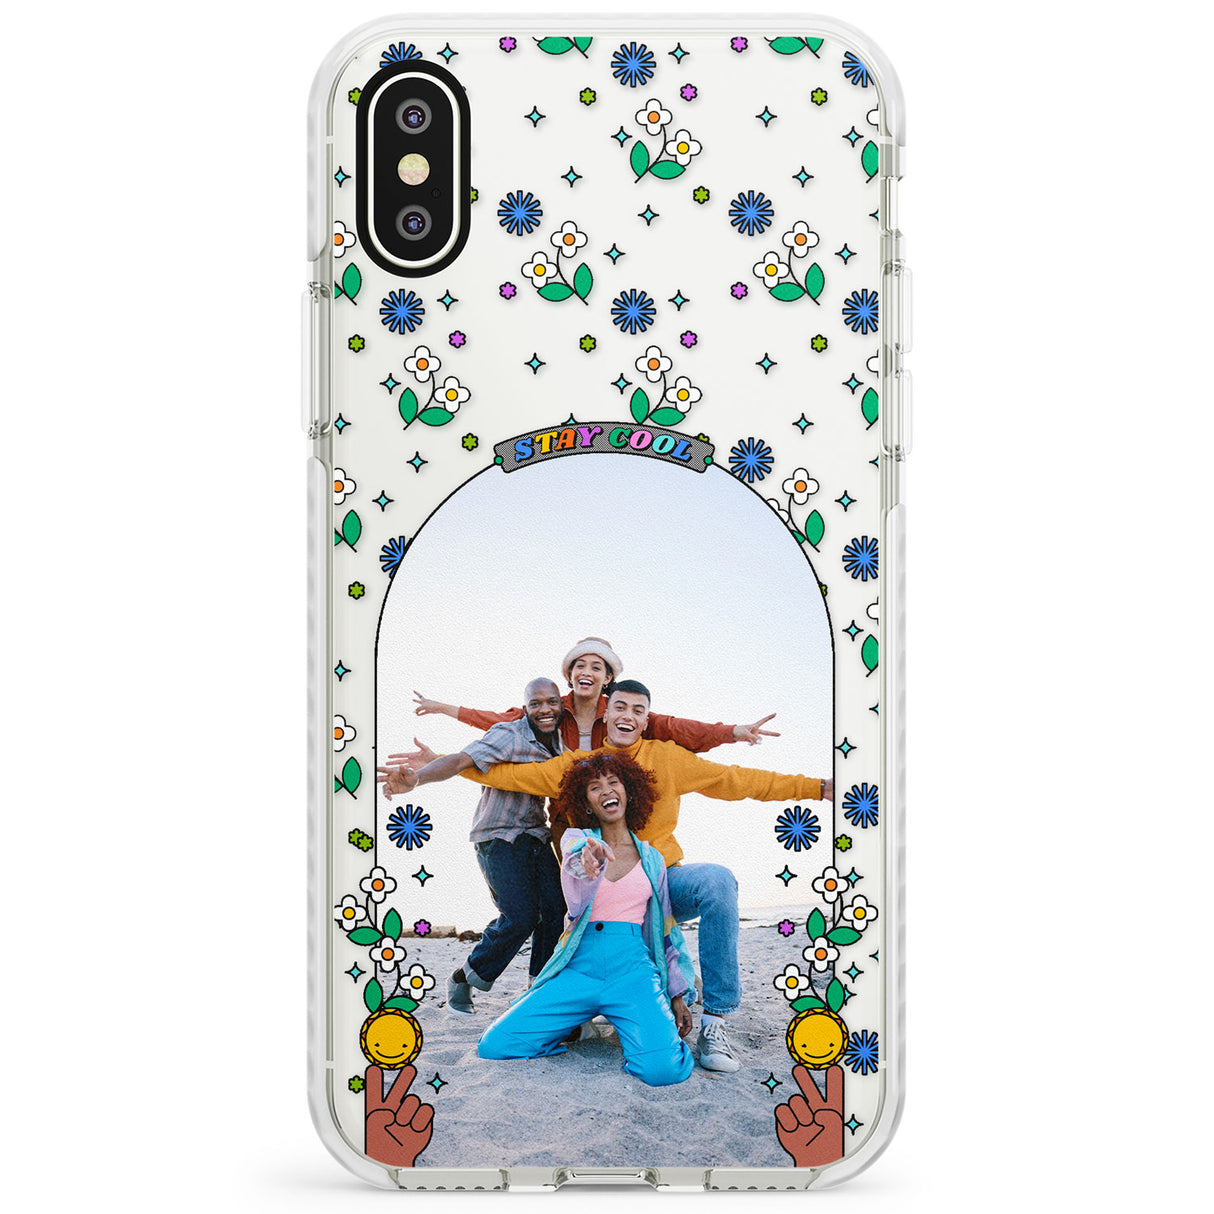 Personalised Summer Photo Frame Impact Phone Case for iPhone X XS Max XR